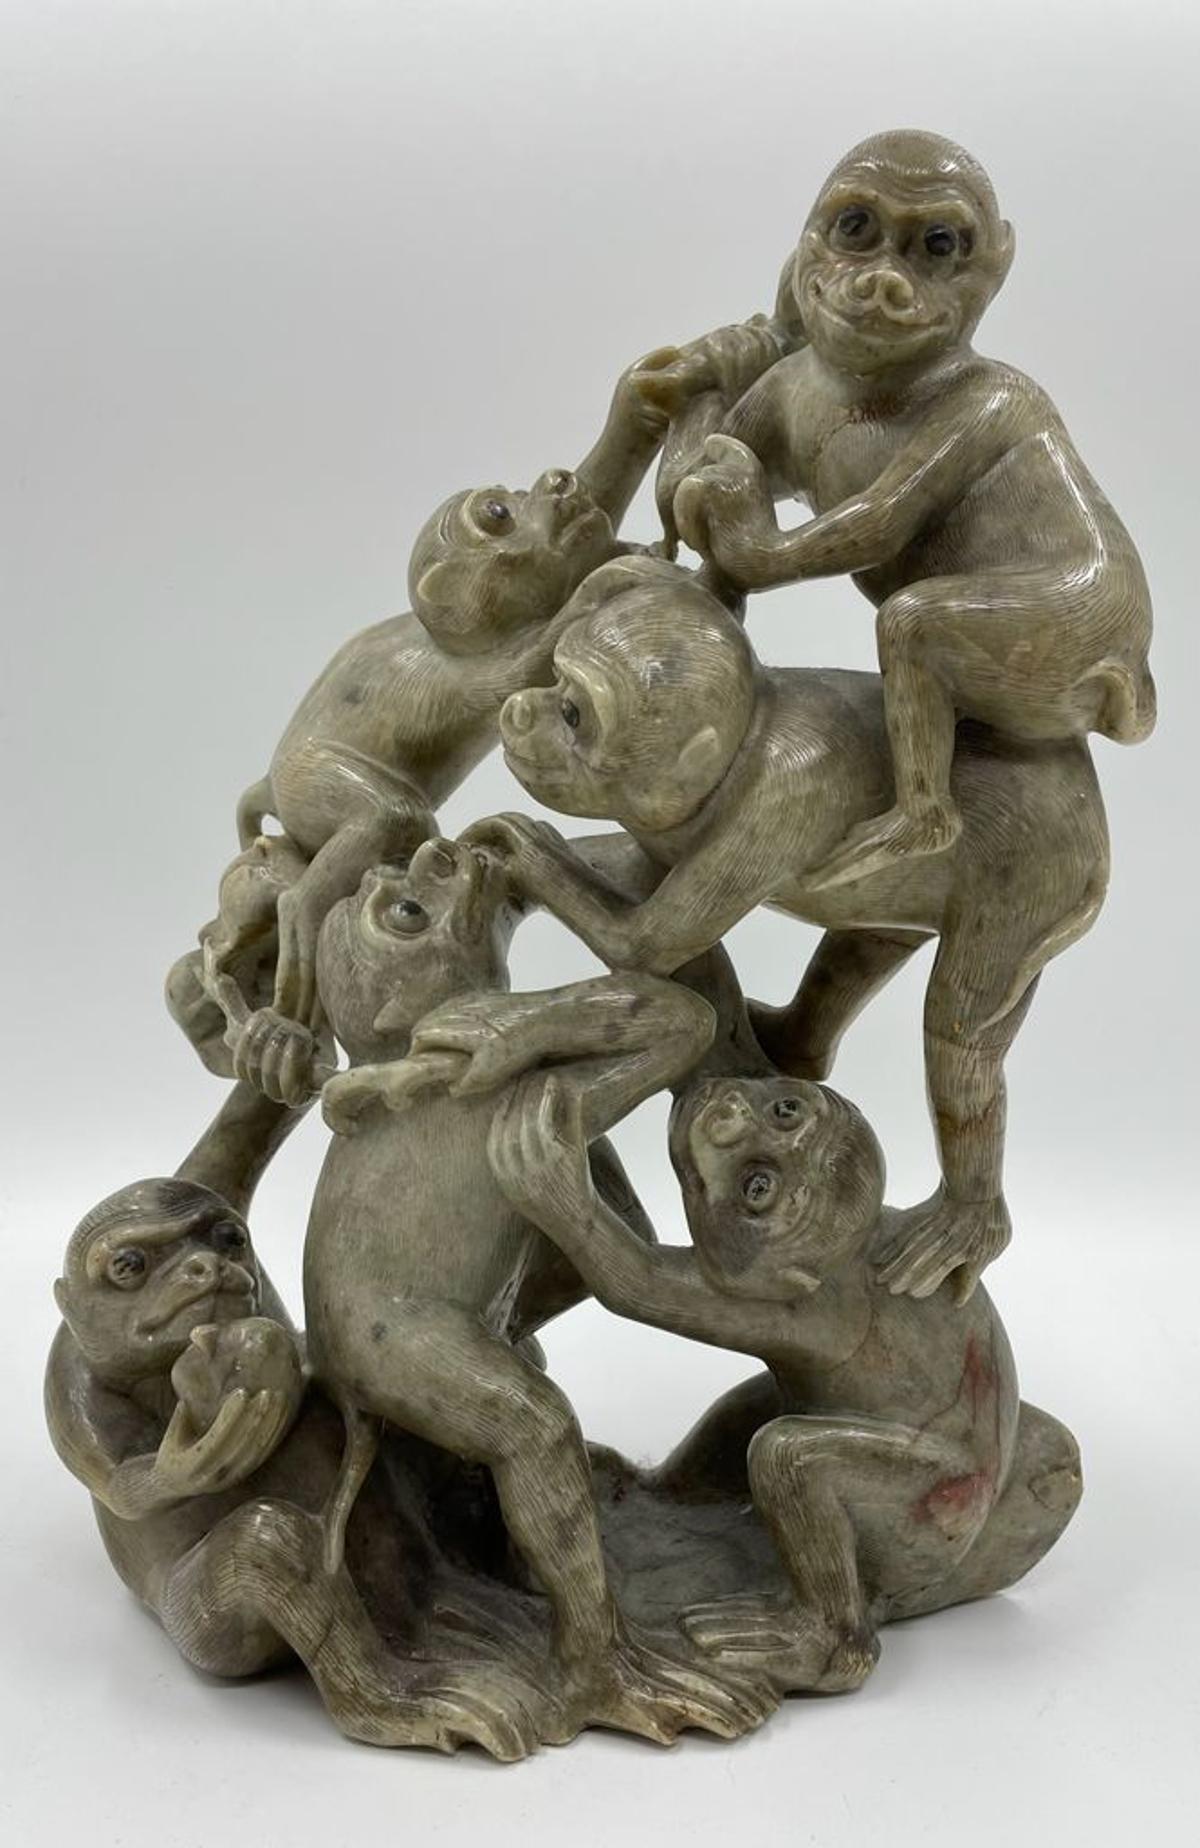  A rare museum quality large soapstone group , dating circa 1780 - 1800 .
Expertly carved from one piece of stone and beautifully detailed .
Seven Monkeys scrambling over one another for a peach , finely engraved fur with eyes painted black .
This